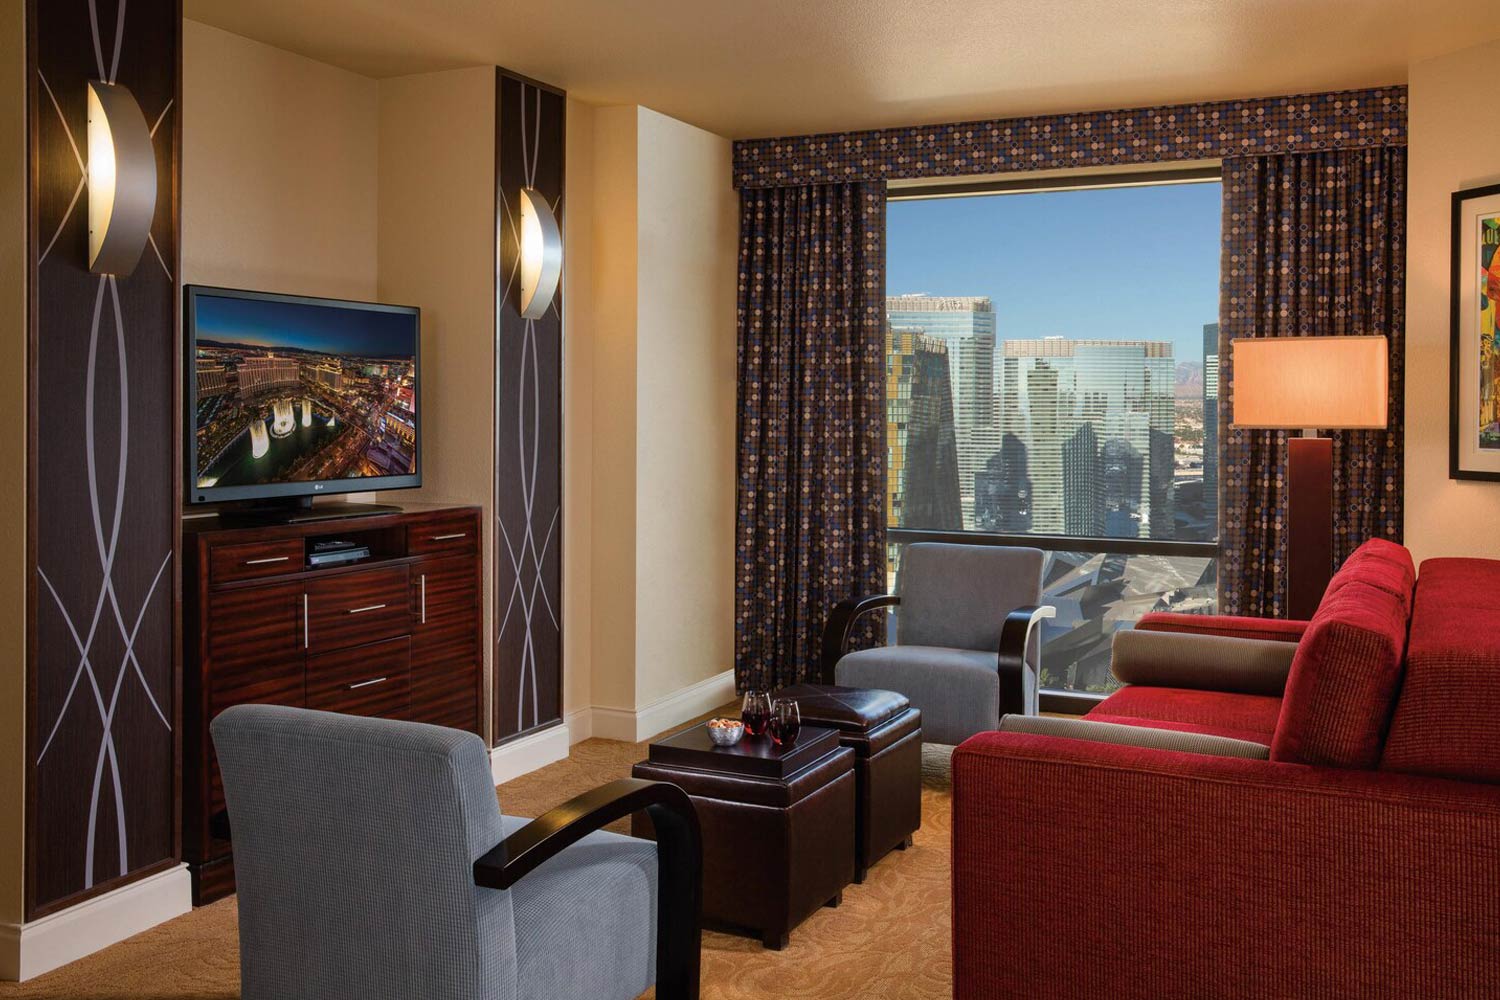 MARRIOTT'S GRAND CHATEAU - Updated 2023 Prices & Hotel Reviews (Paradise,  NV)